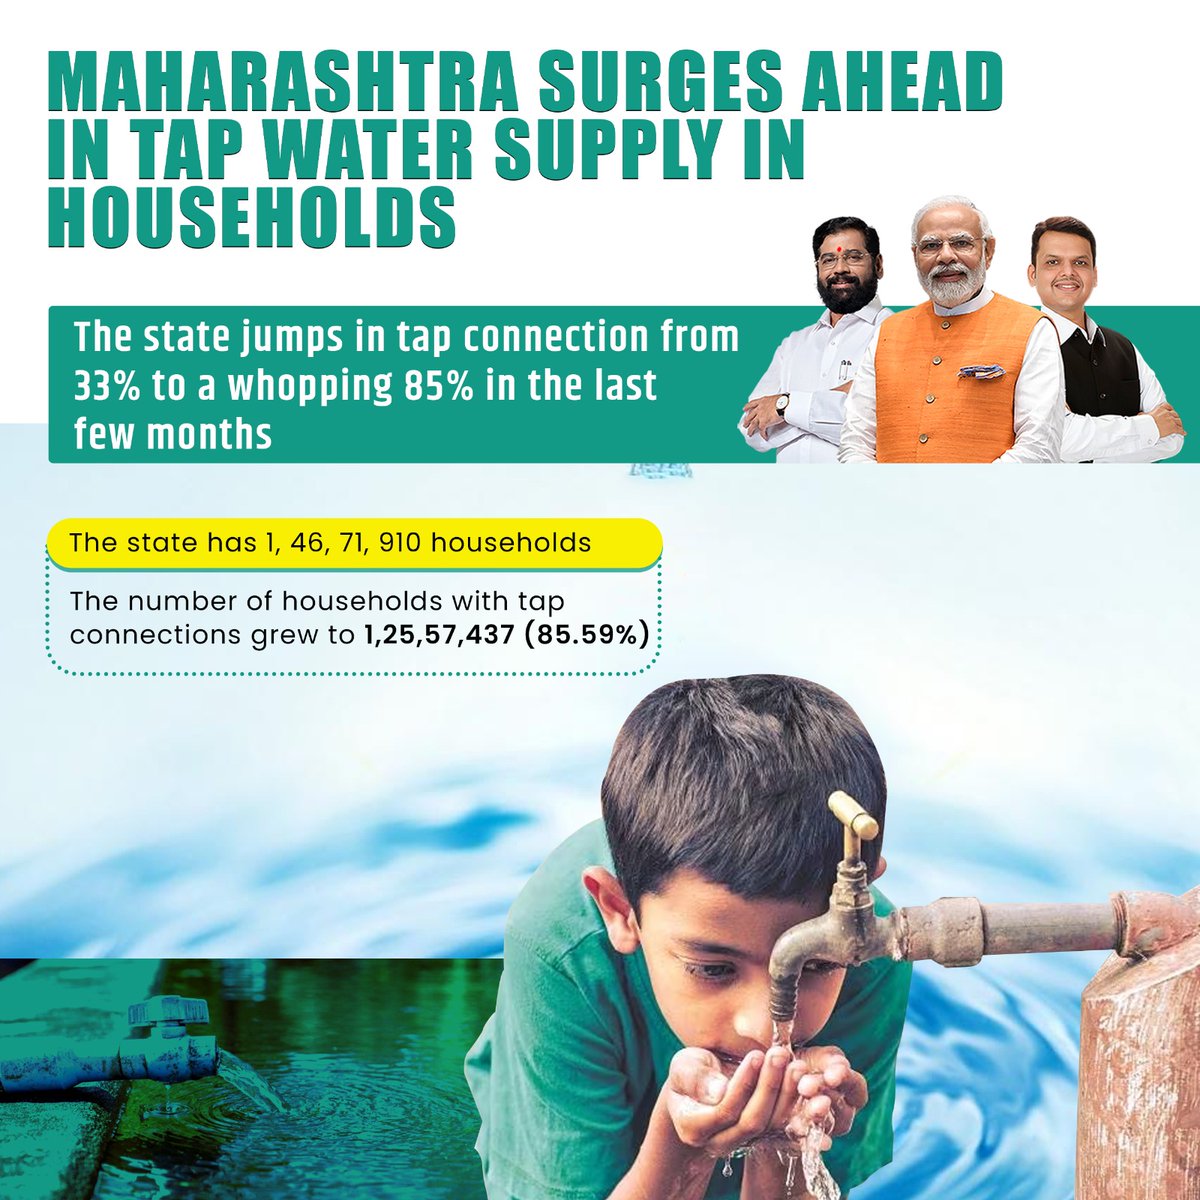 Maharashtra's surge to 85% tap water connection in households is a testament to the effective governance under CM Eknath Shinde's leadership. This transformative initiative enhances public health and quality of life across the state.